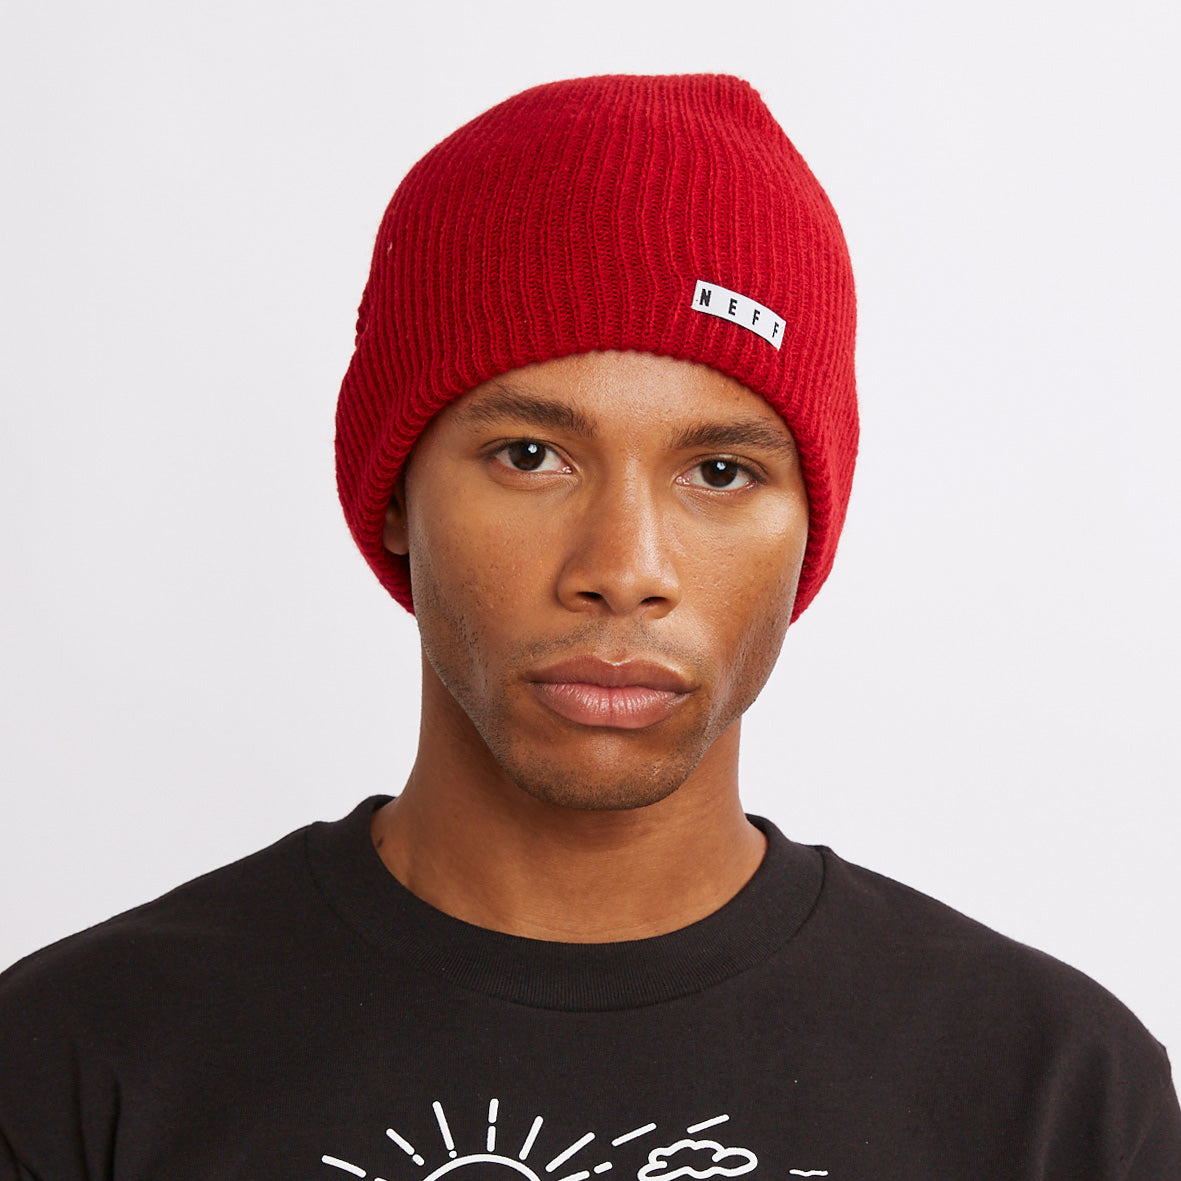 DAILY BEANIE - RED